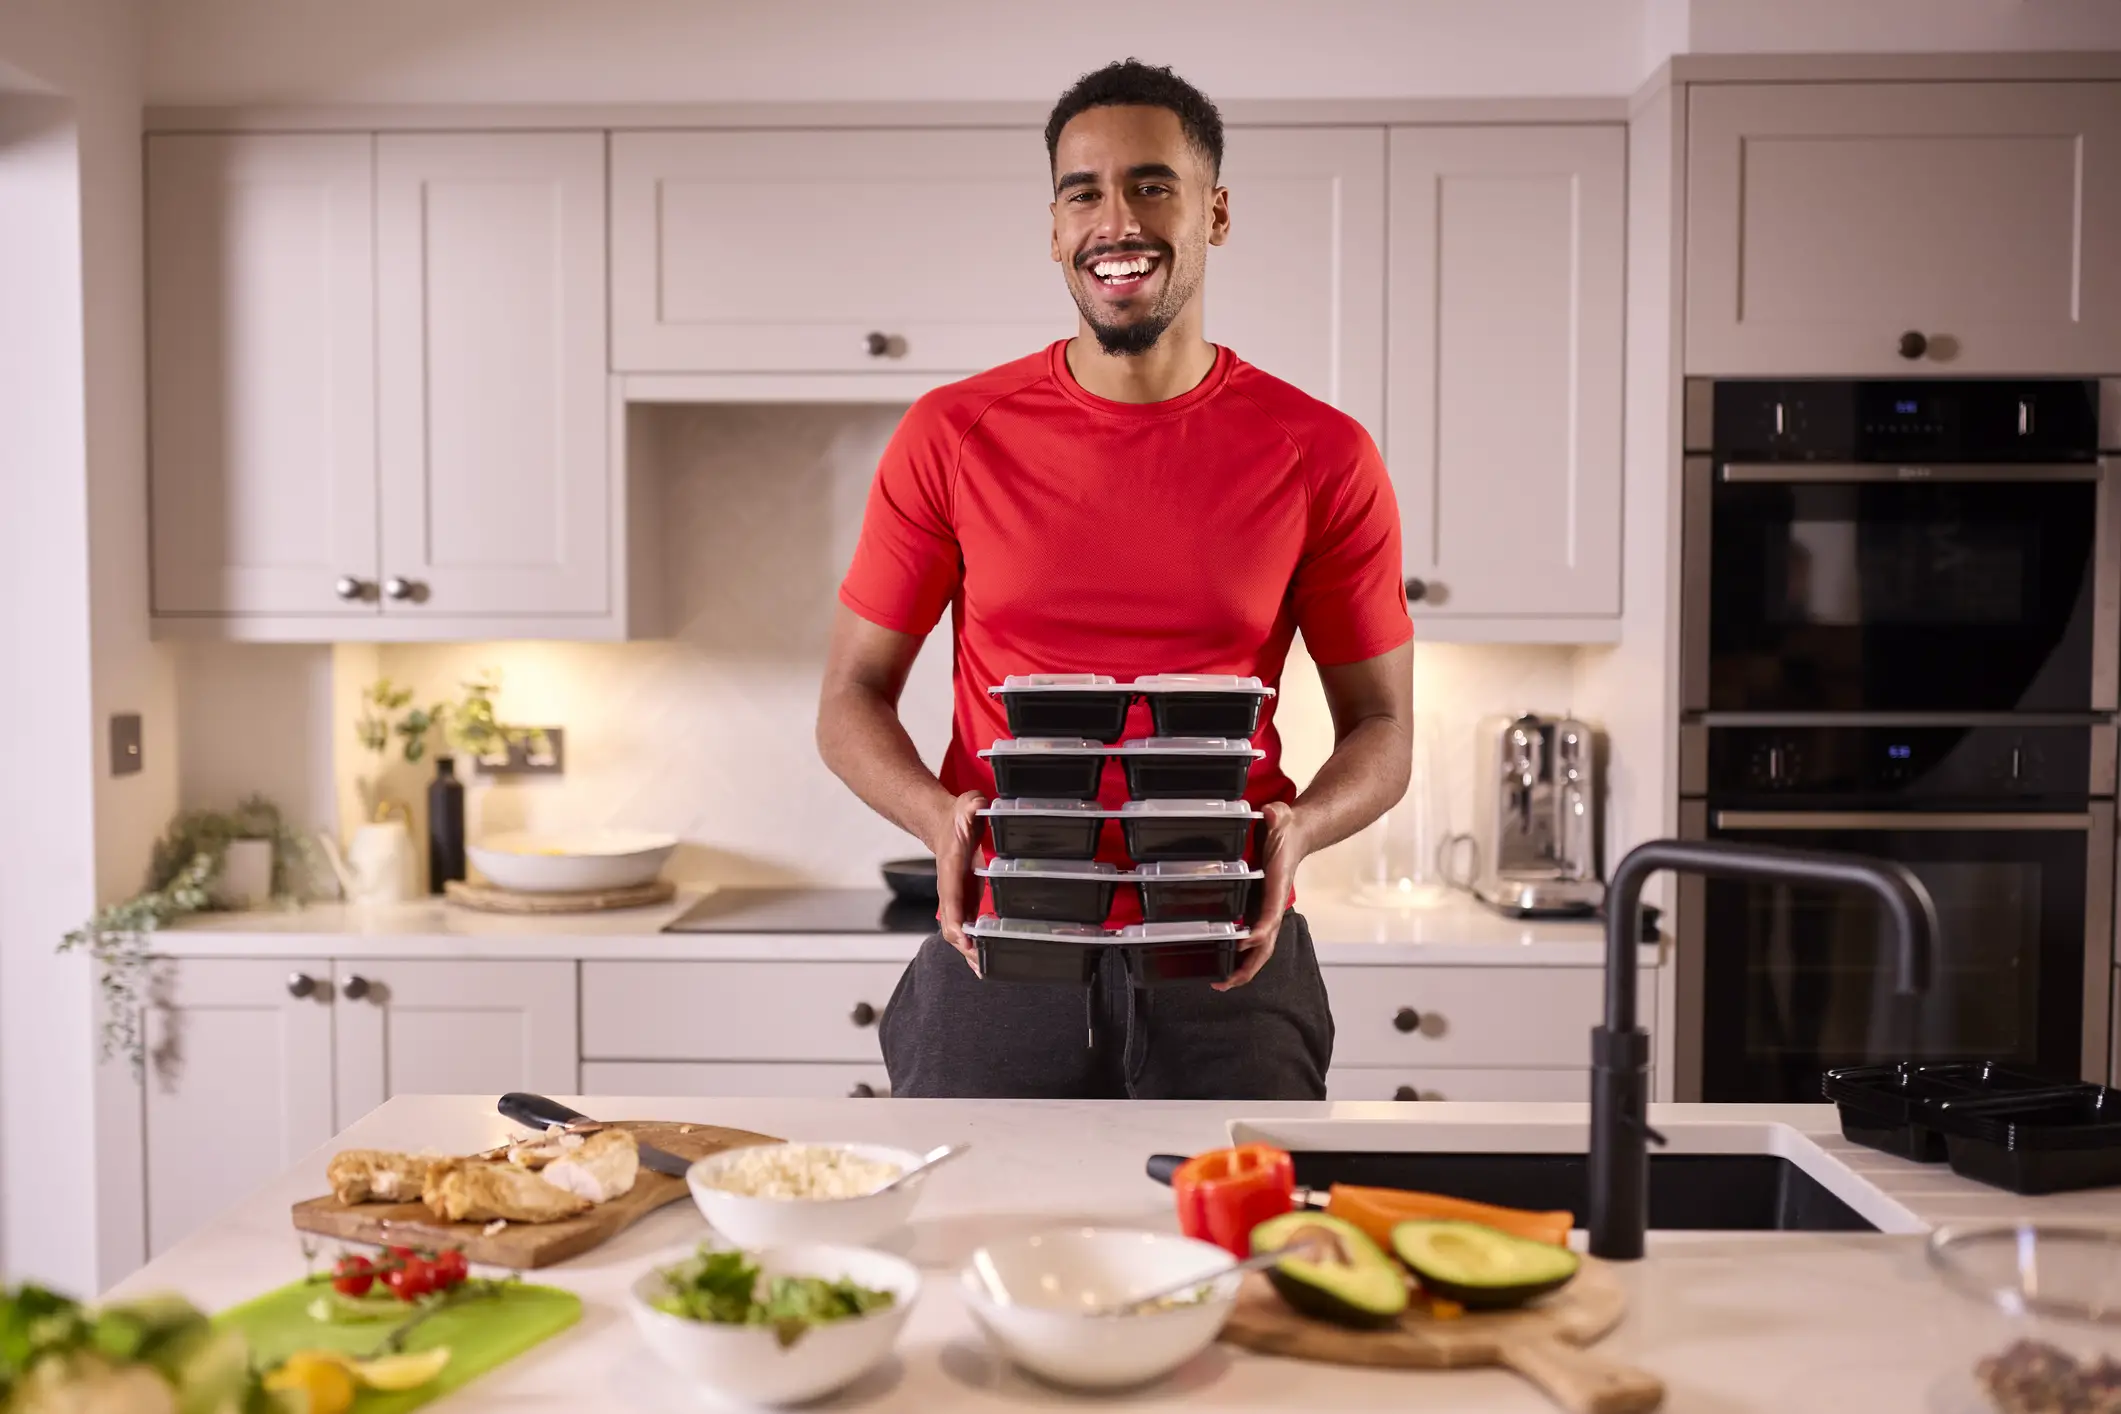 Man preparing several fitness meals to support his fitness goals